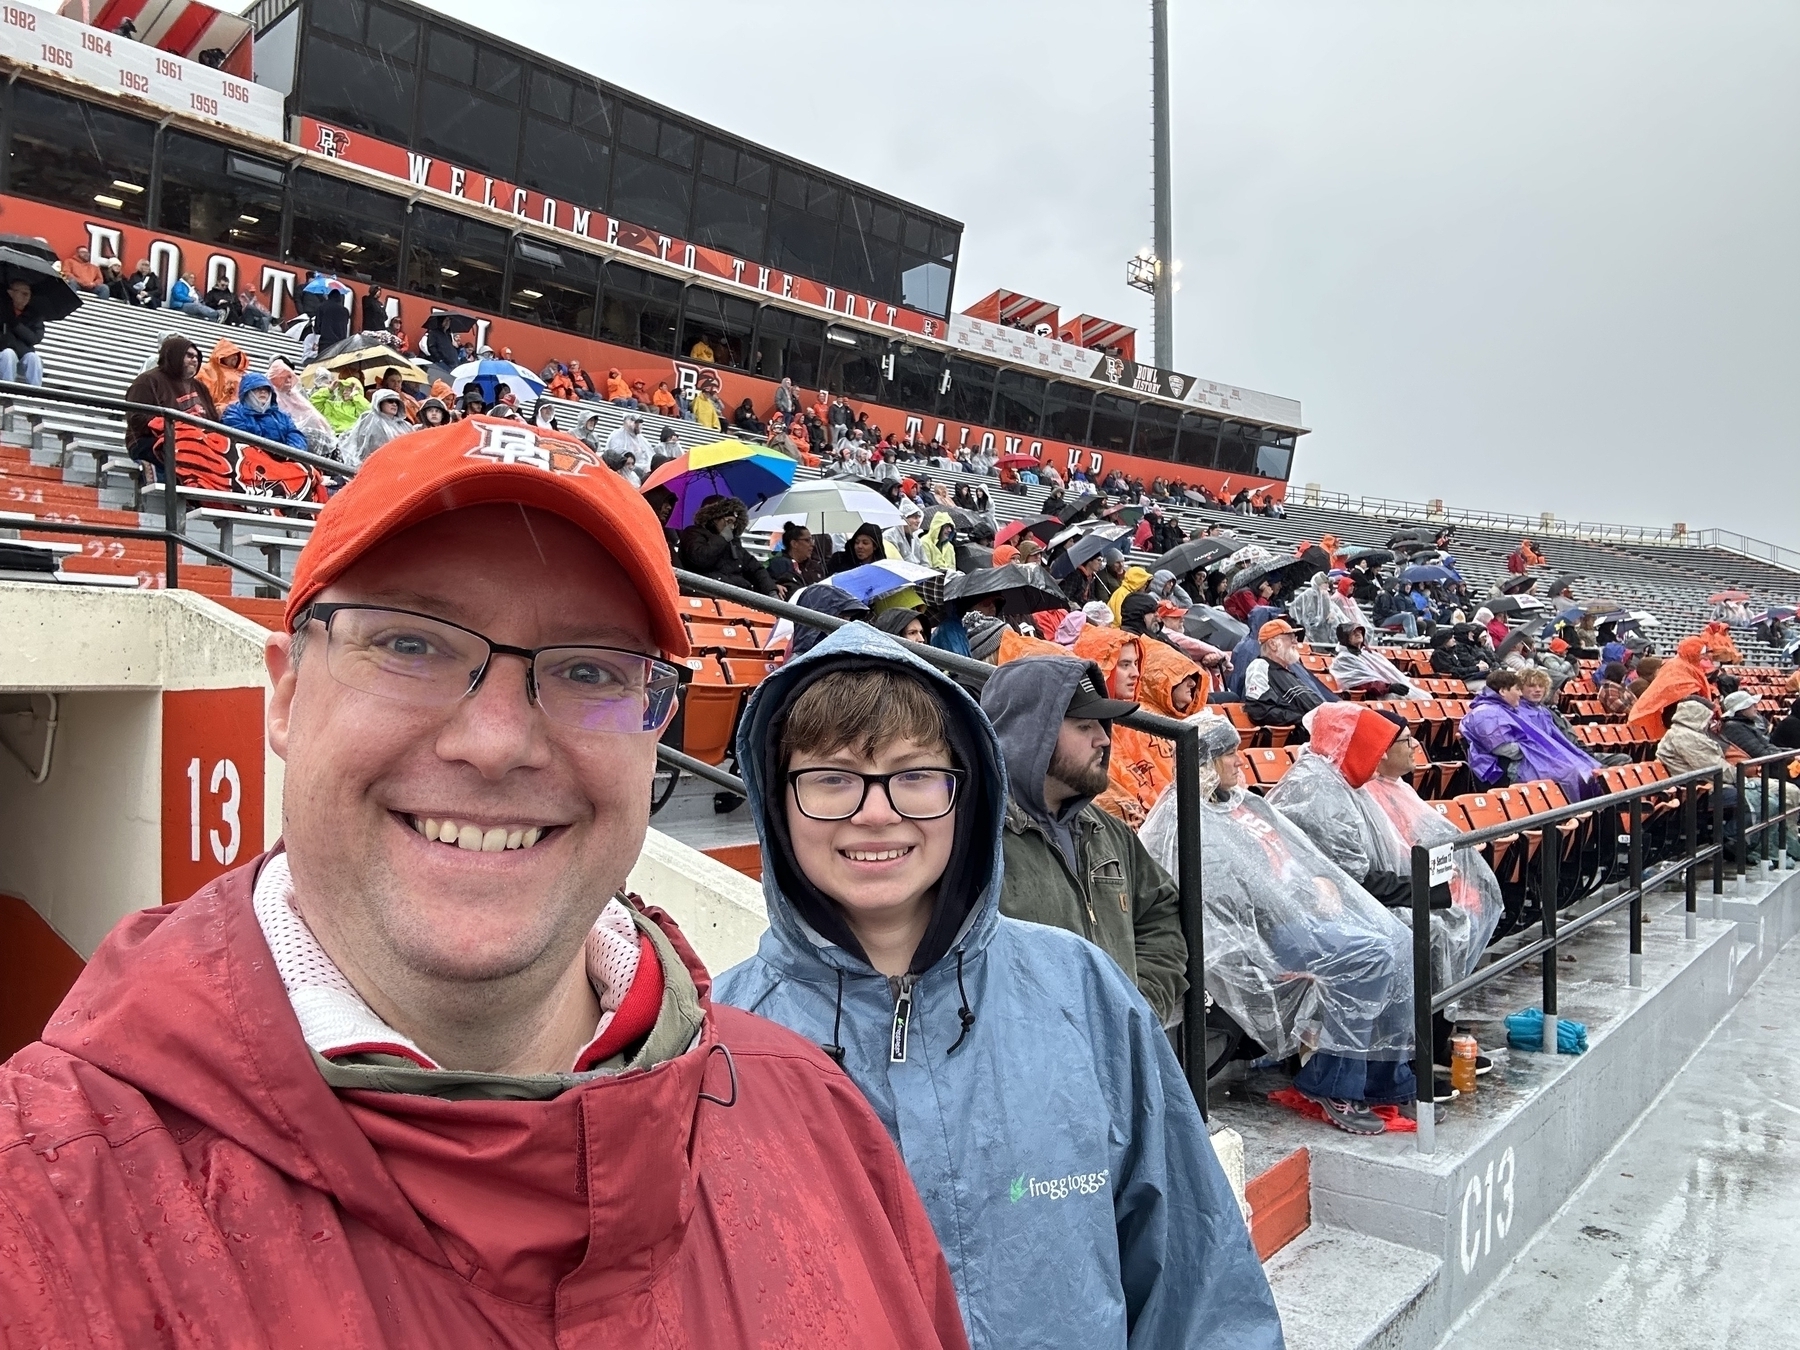 Photo of the author and son at a Bowling Green college football game